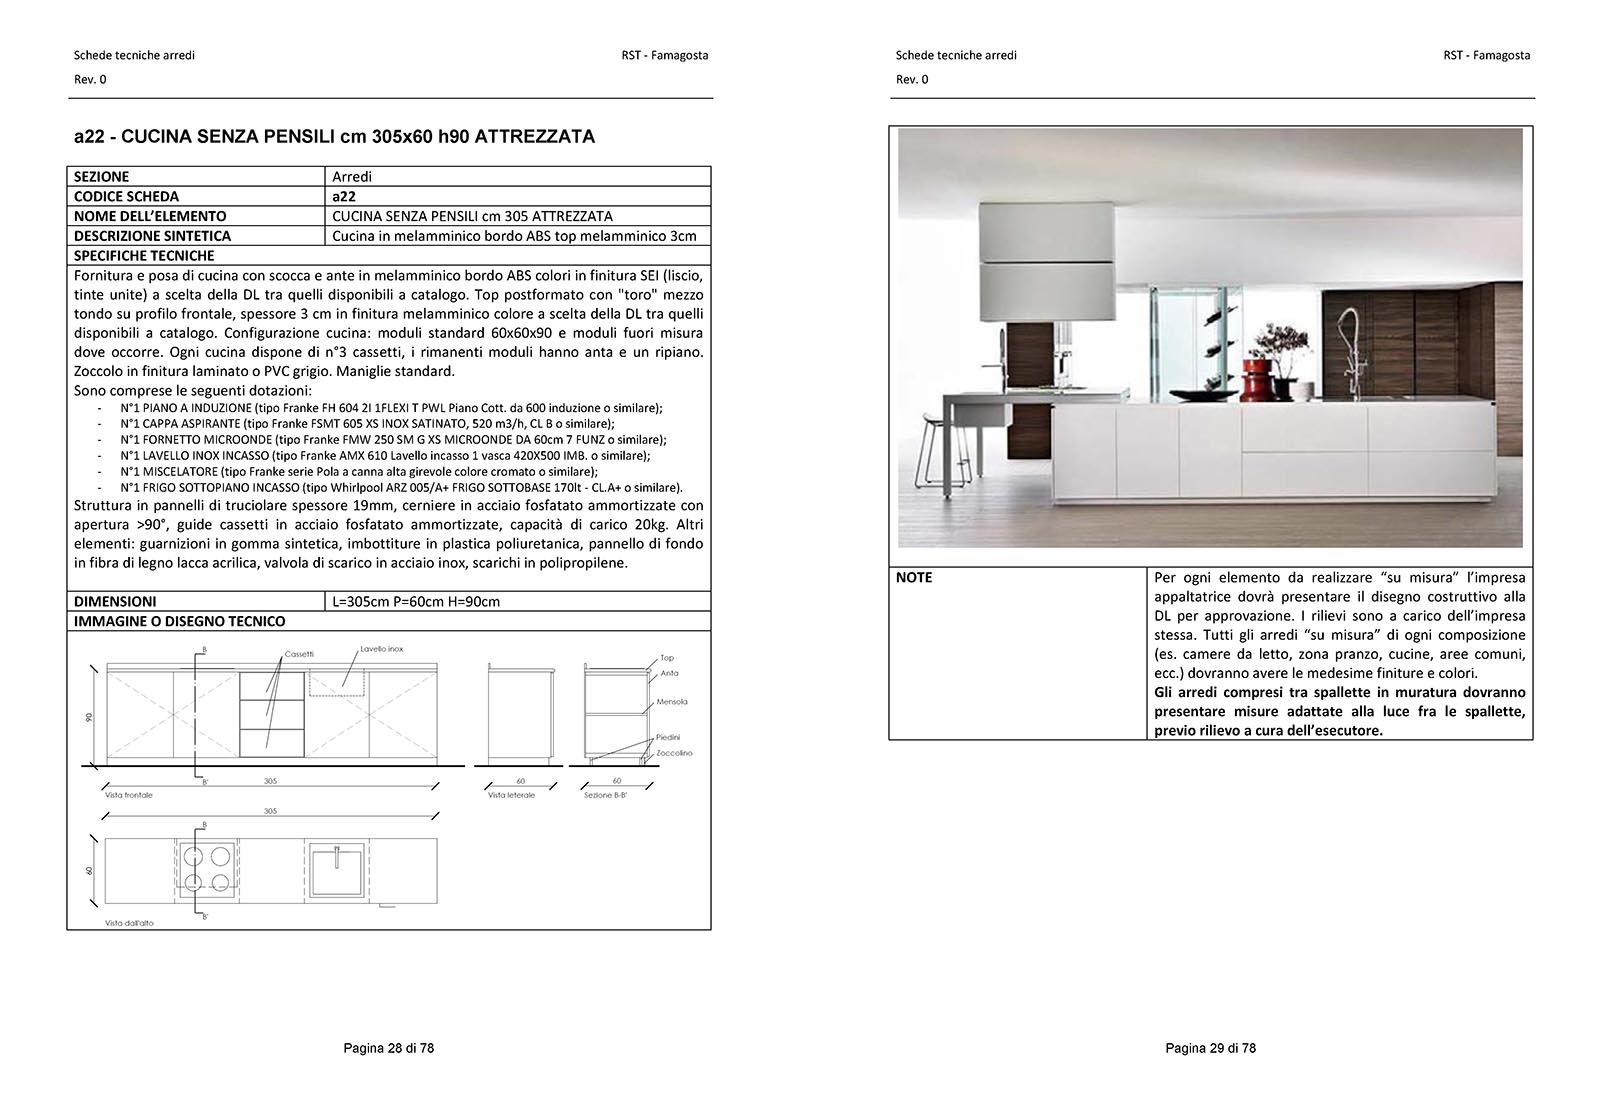 Temporary social house in the Famagosta area in Milan - Example of a furniture technical sheet